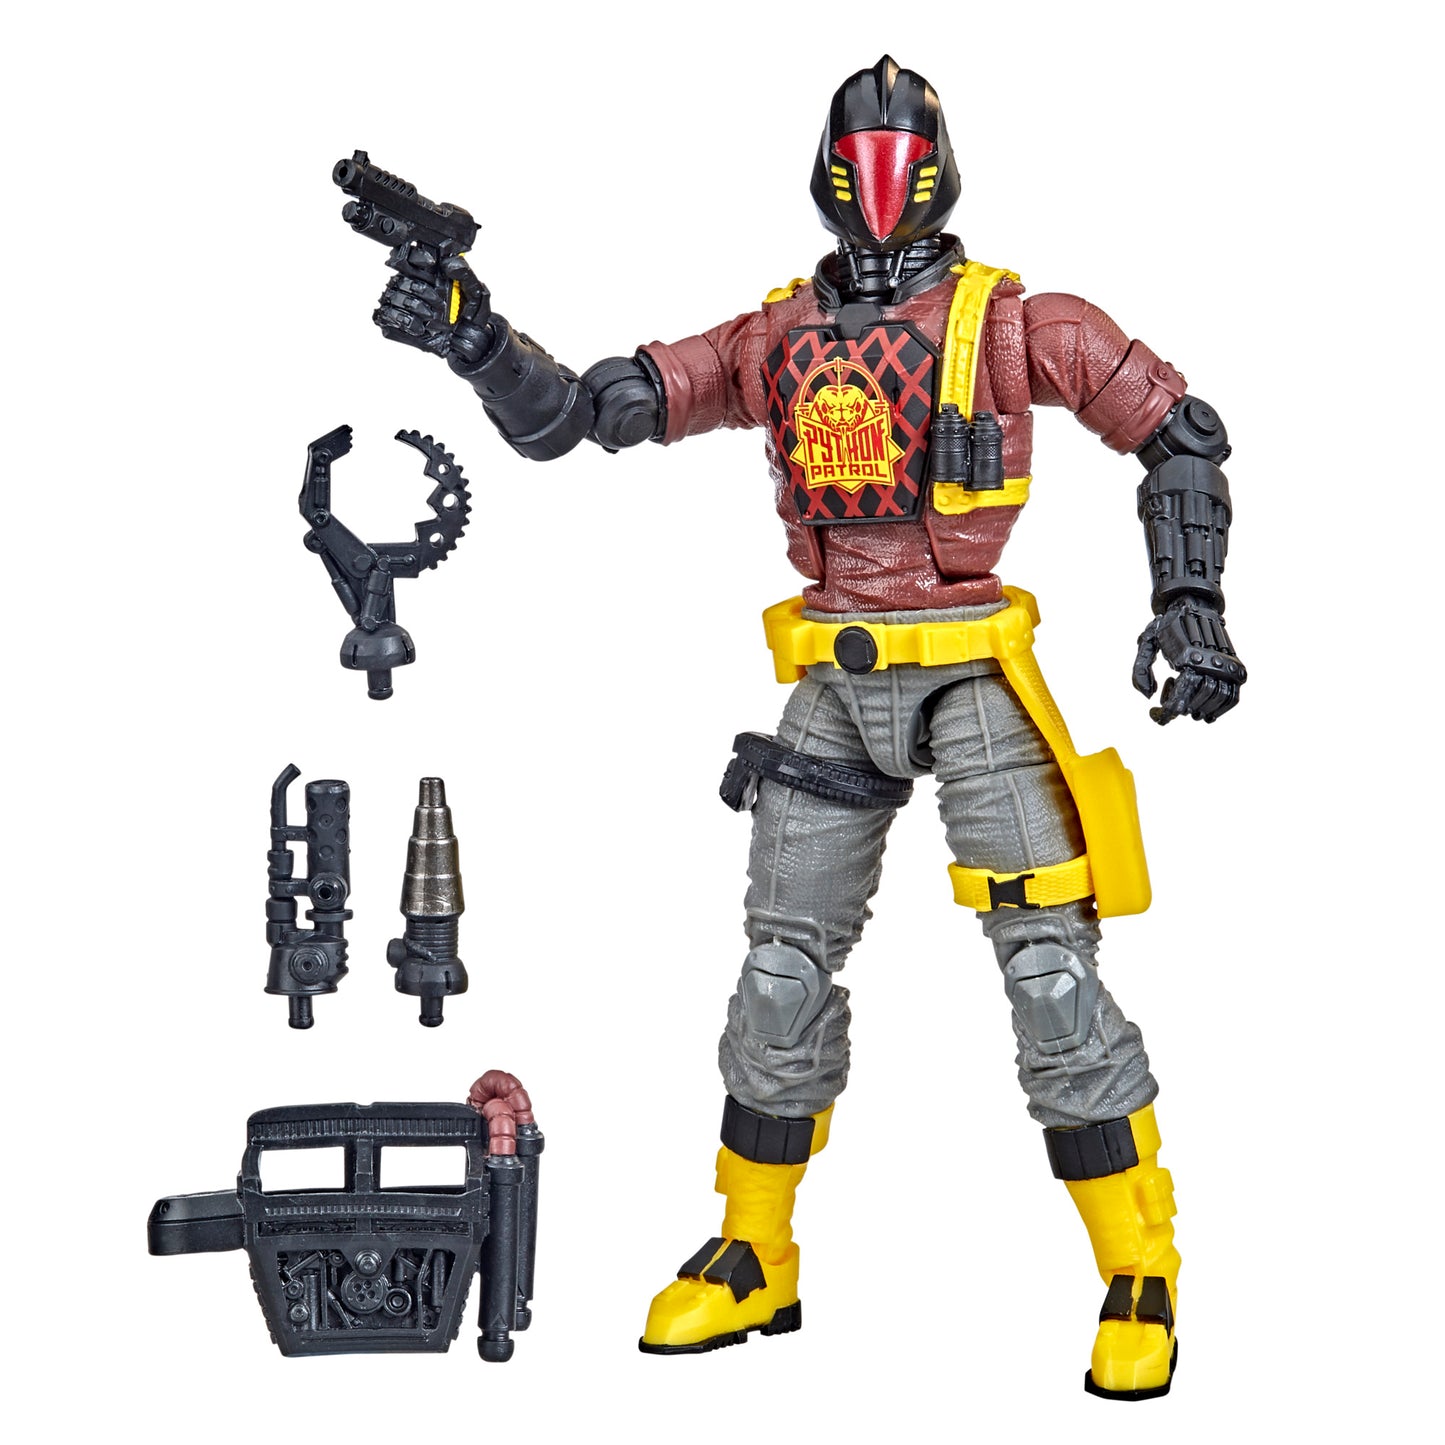 G.I. Joe Classified Series B.A.T. Action Figure 41 Premium Collectible Toy With Multiple Accessories, 6-Inch-Scale, Custom Package Art, Kids - Heretoserveyou